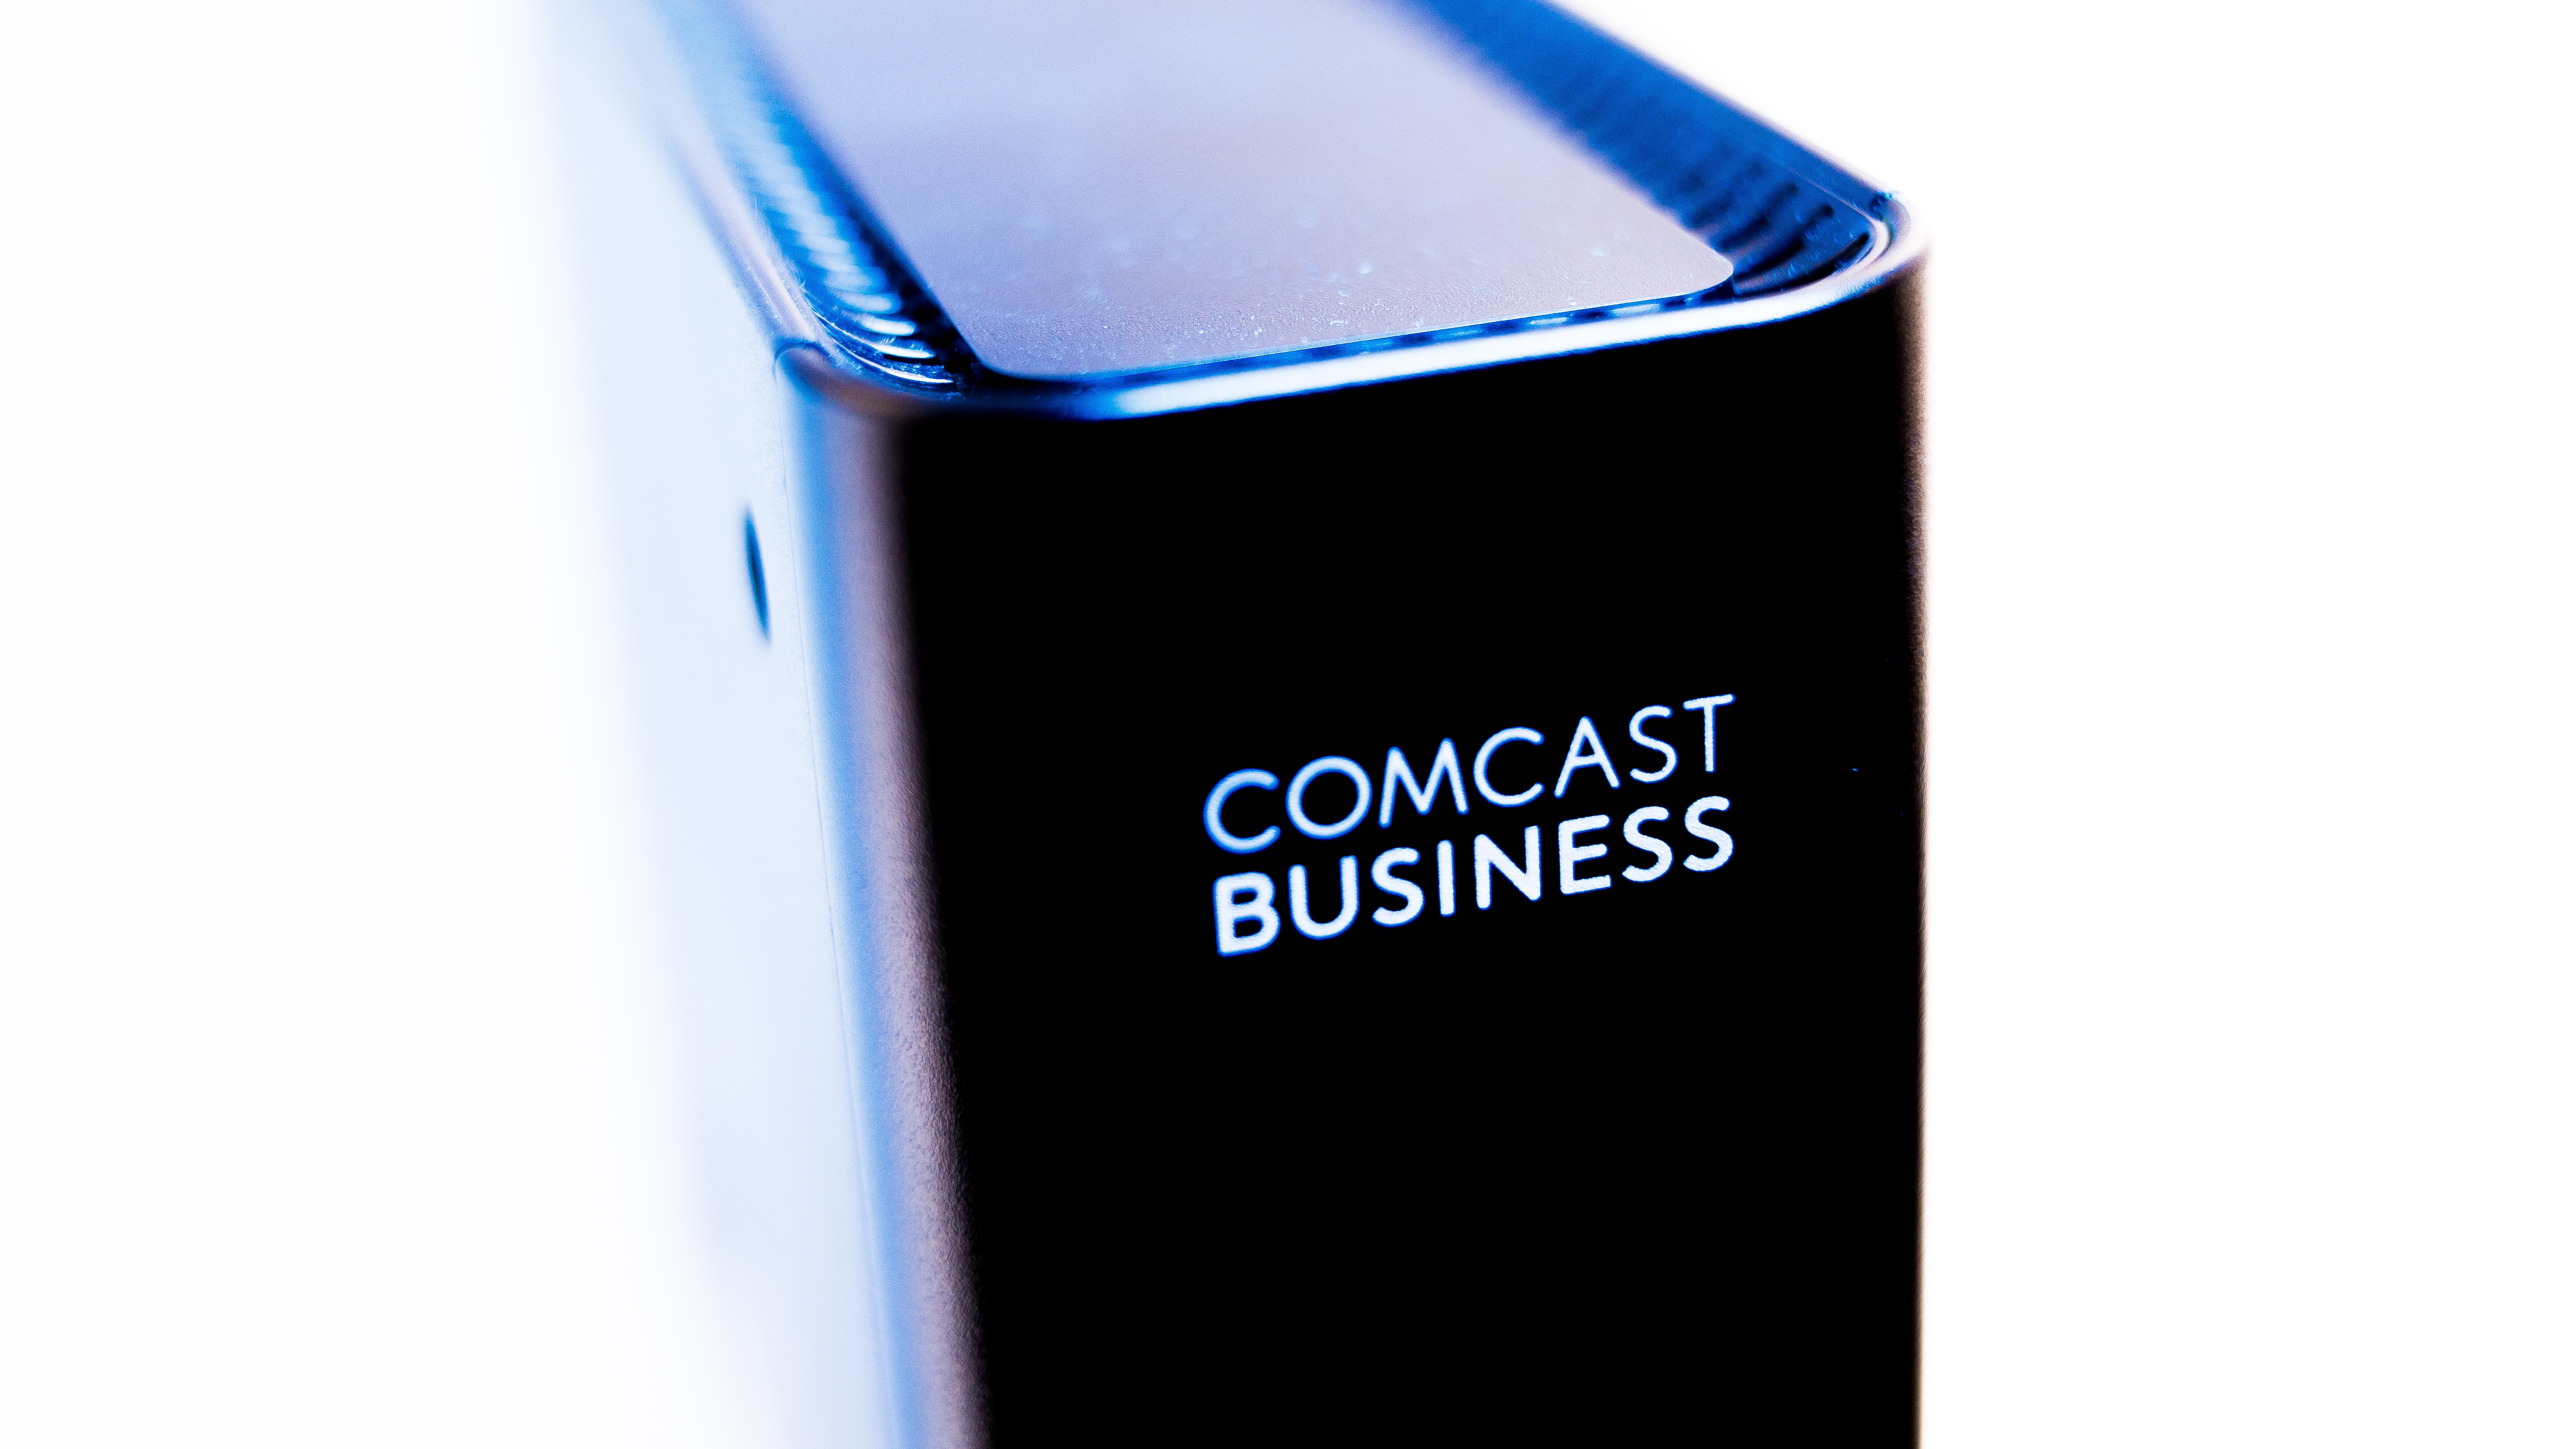 Comcast Business Announces 450,000 Investment to Expand High